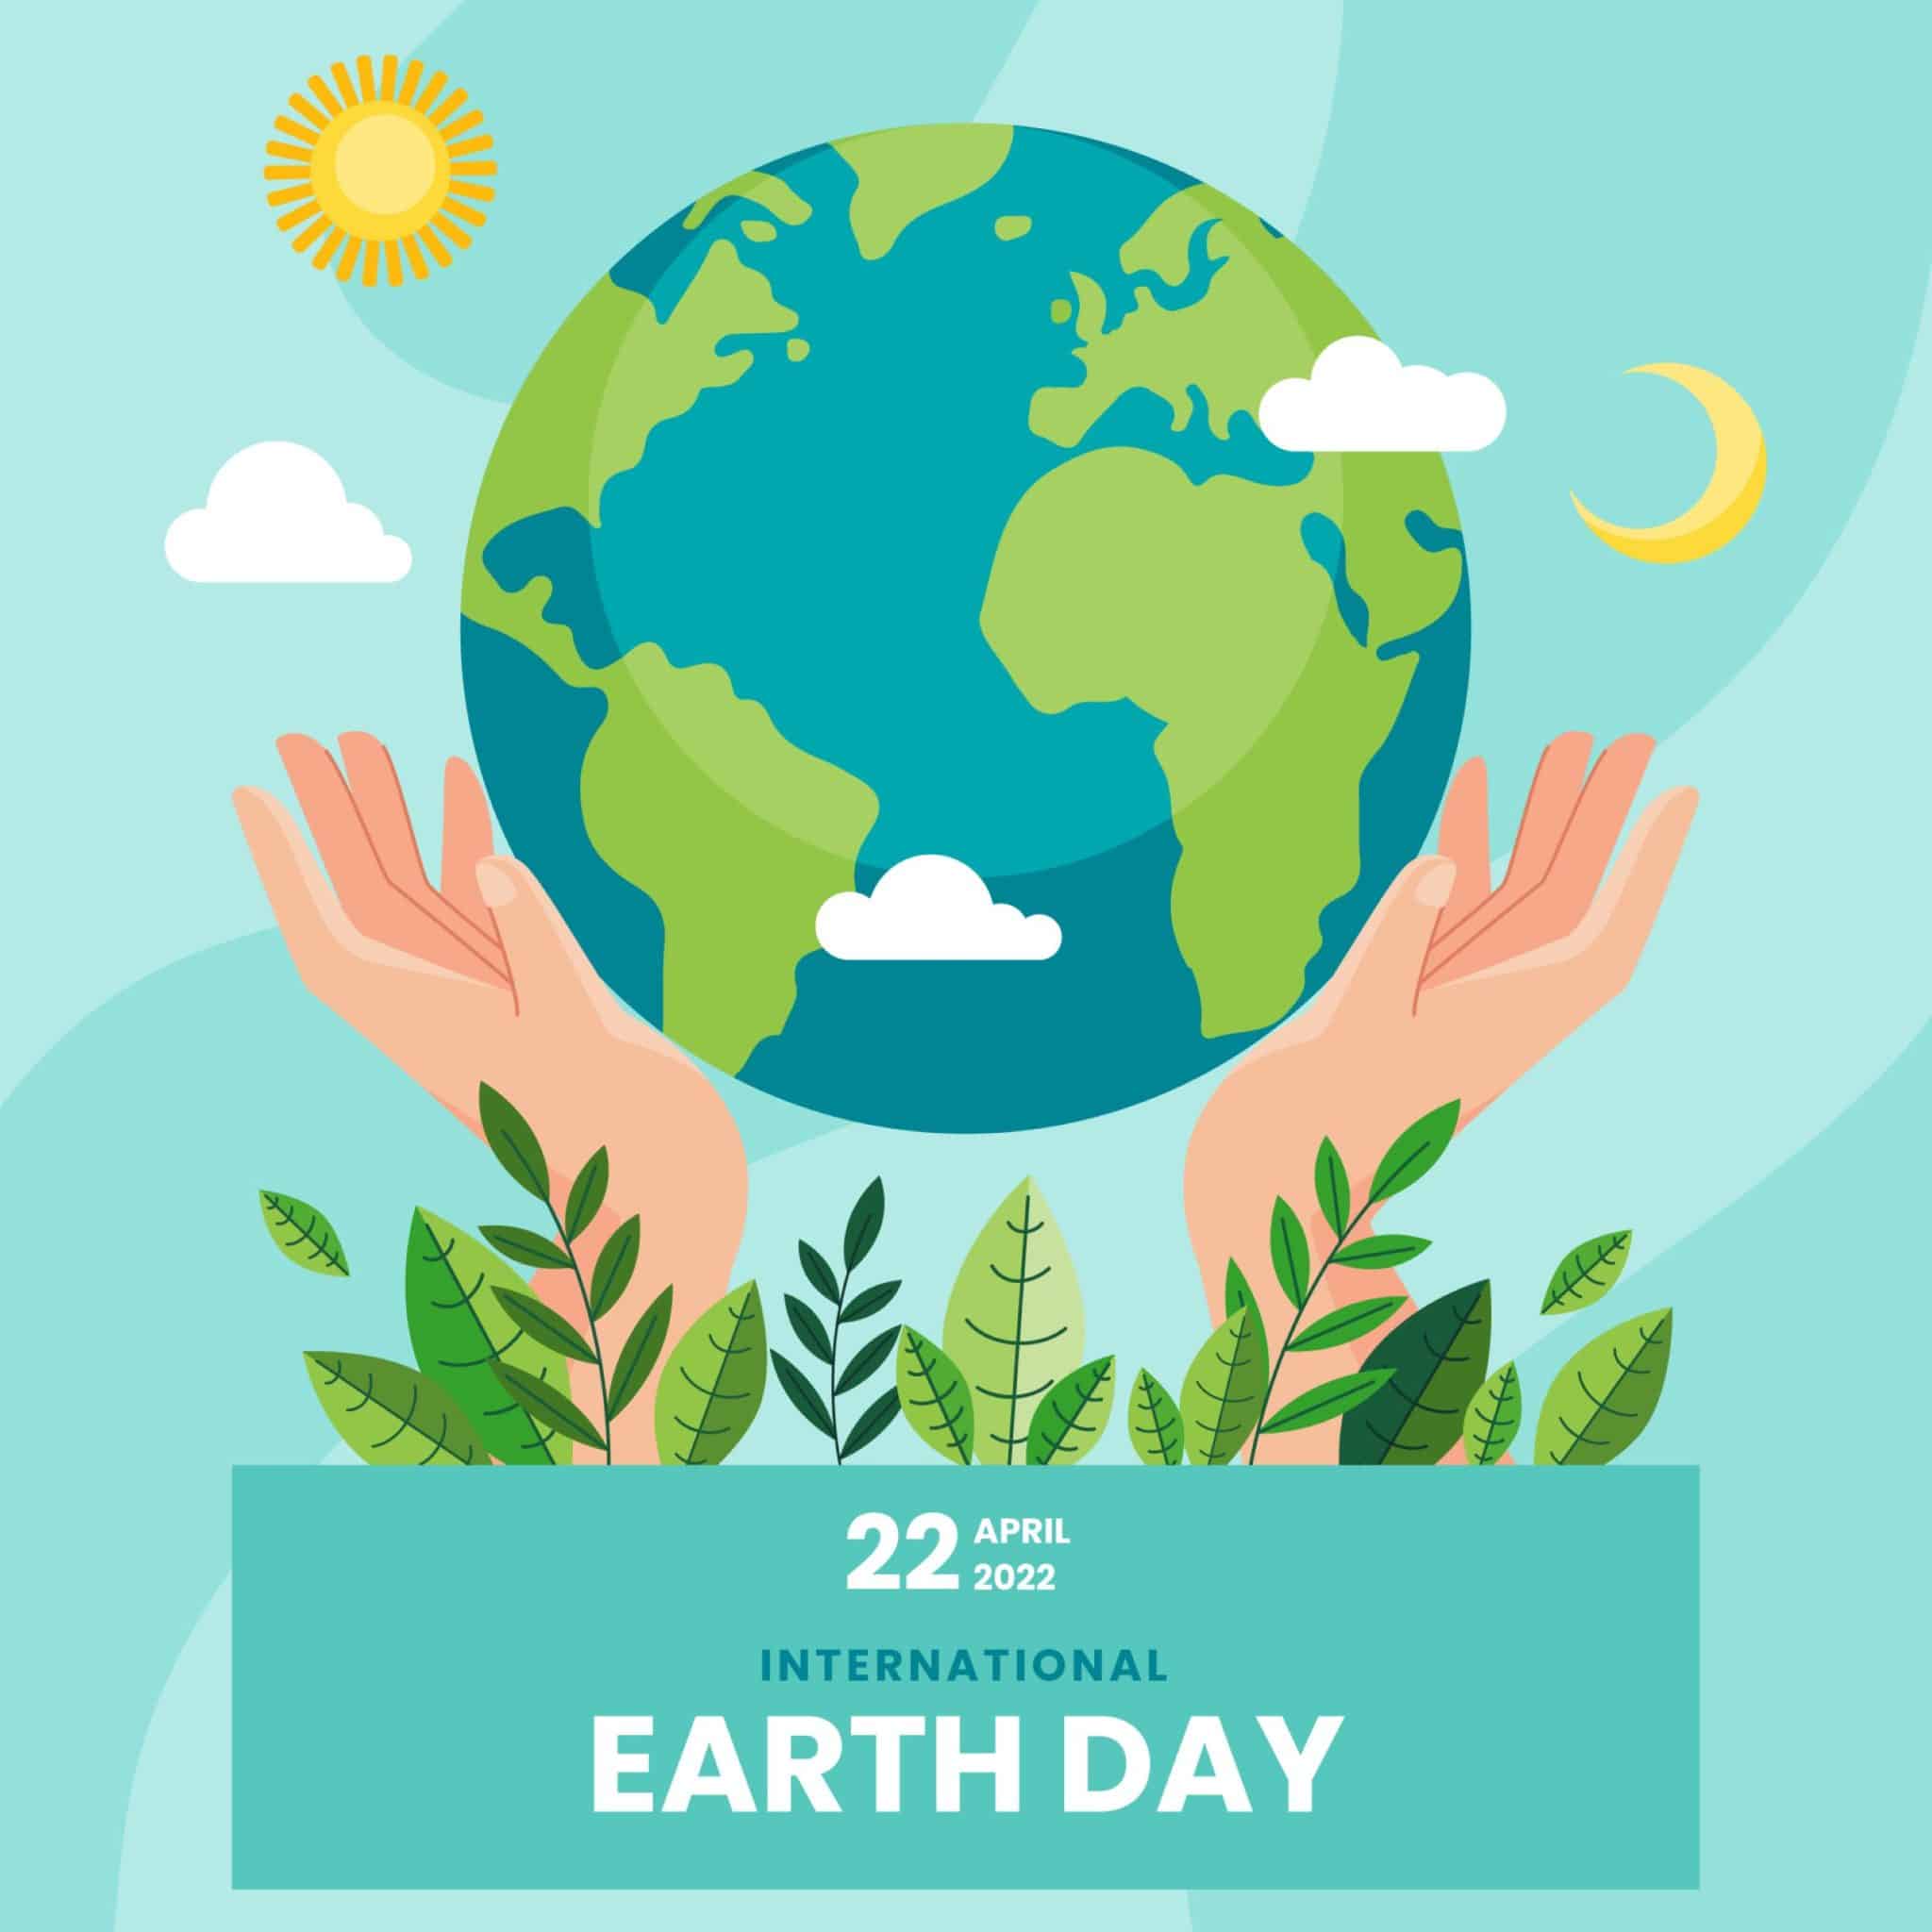 What are five issues that Earth Day focuses on?